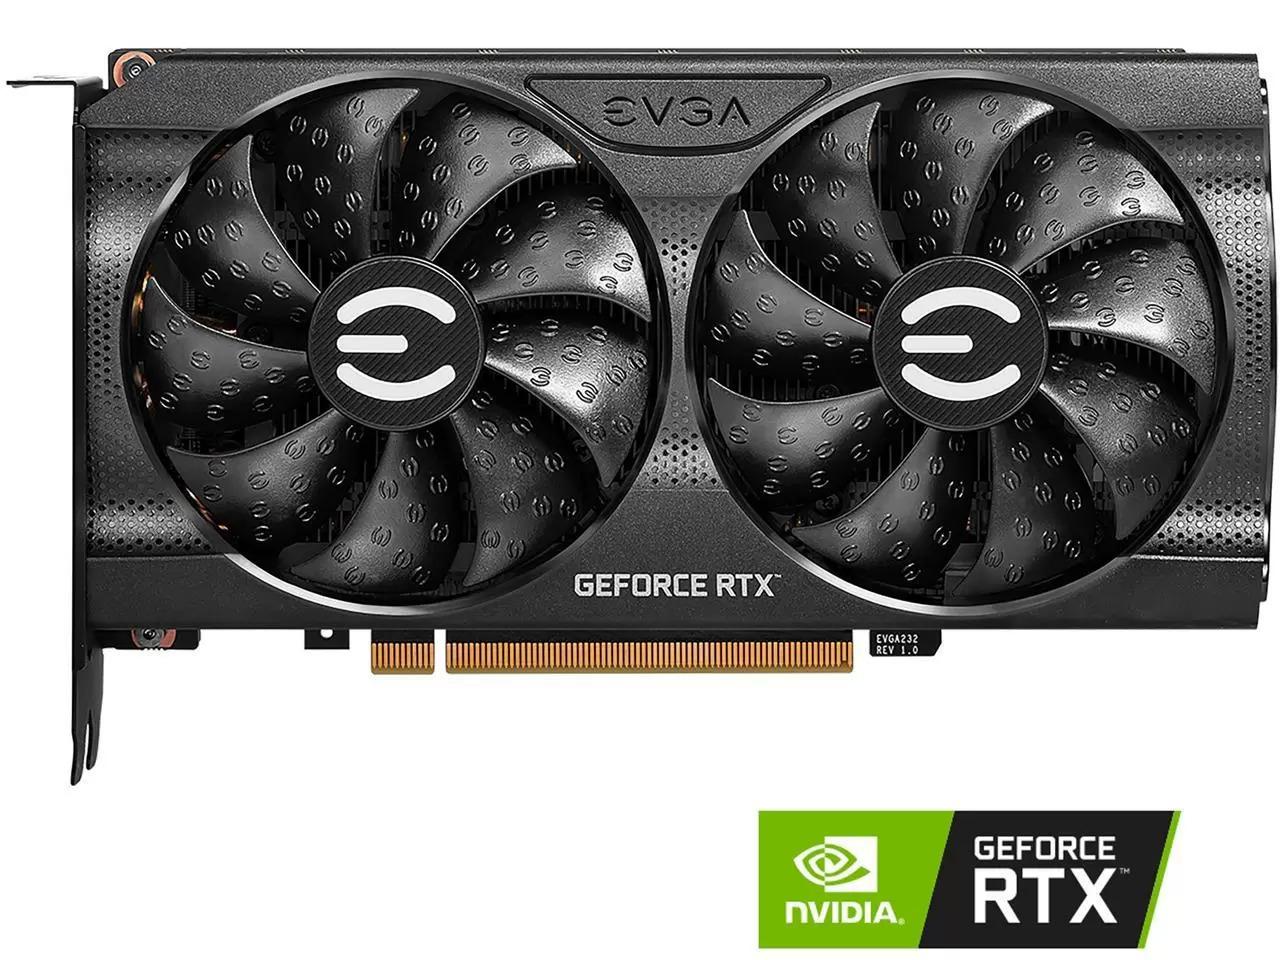 EVGA GeForce RTX 3060 XC GAMING 12GB GDDR6 Graphics Card for $398.88 Shipped